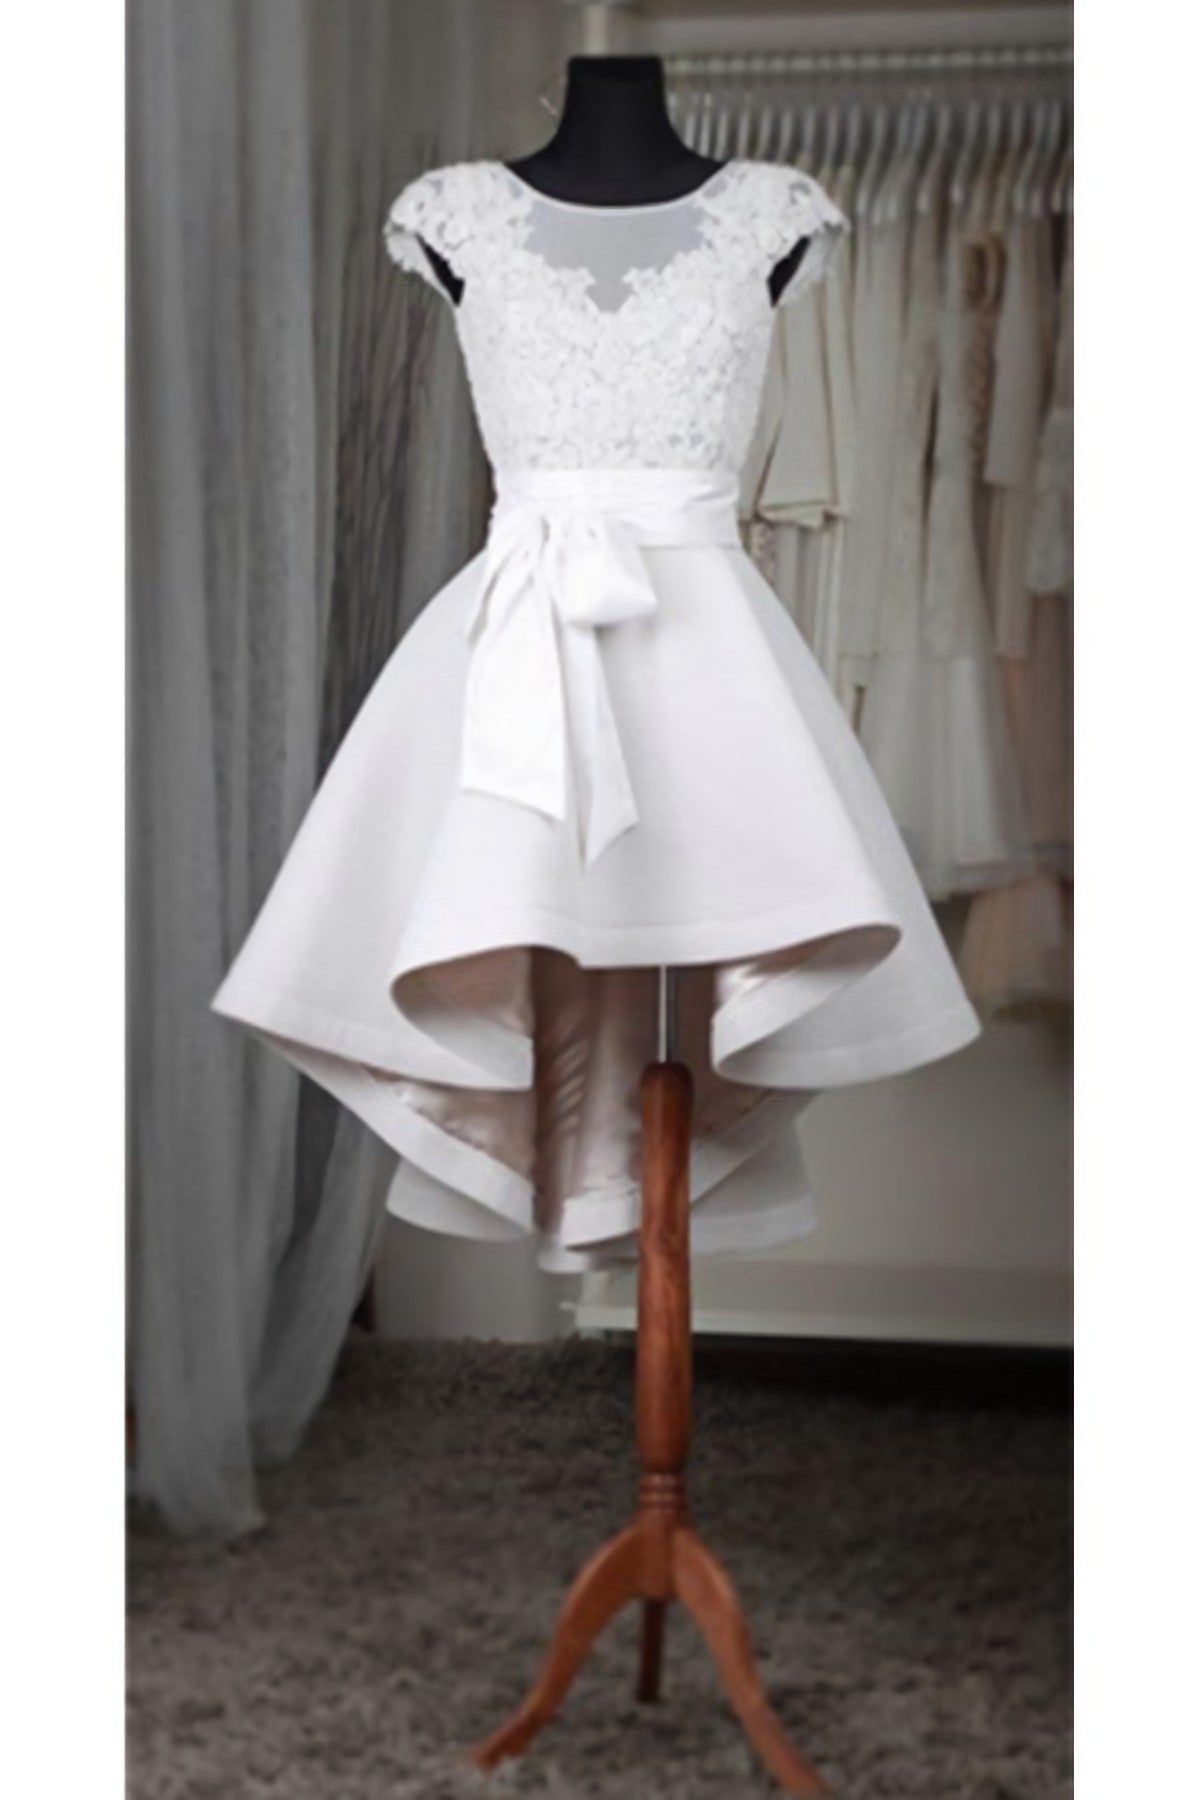 Homecoming Dress Inspo, White Lace Short For Teens Classy Short Sleeves White Belt Homecoming Dresses